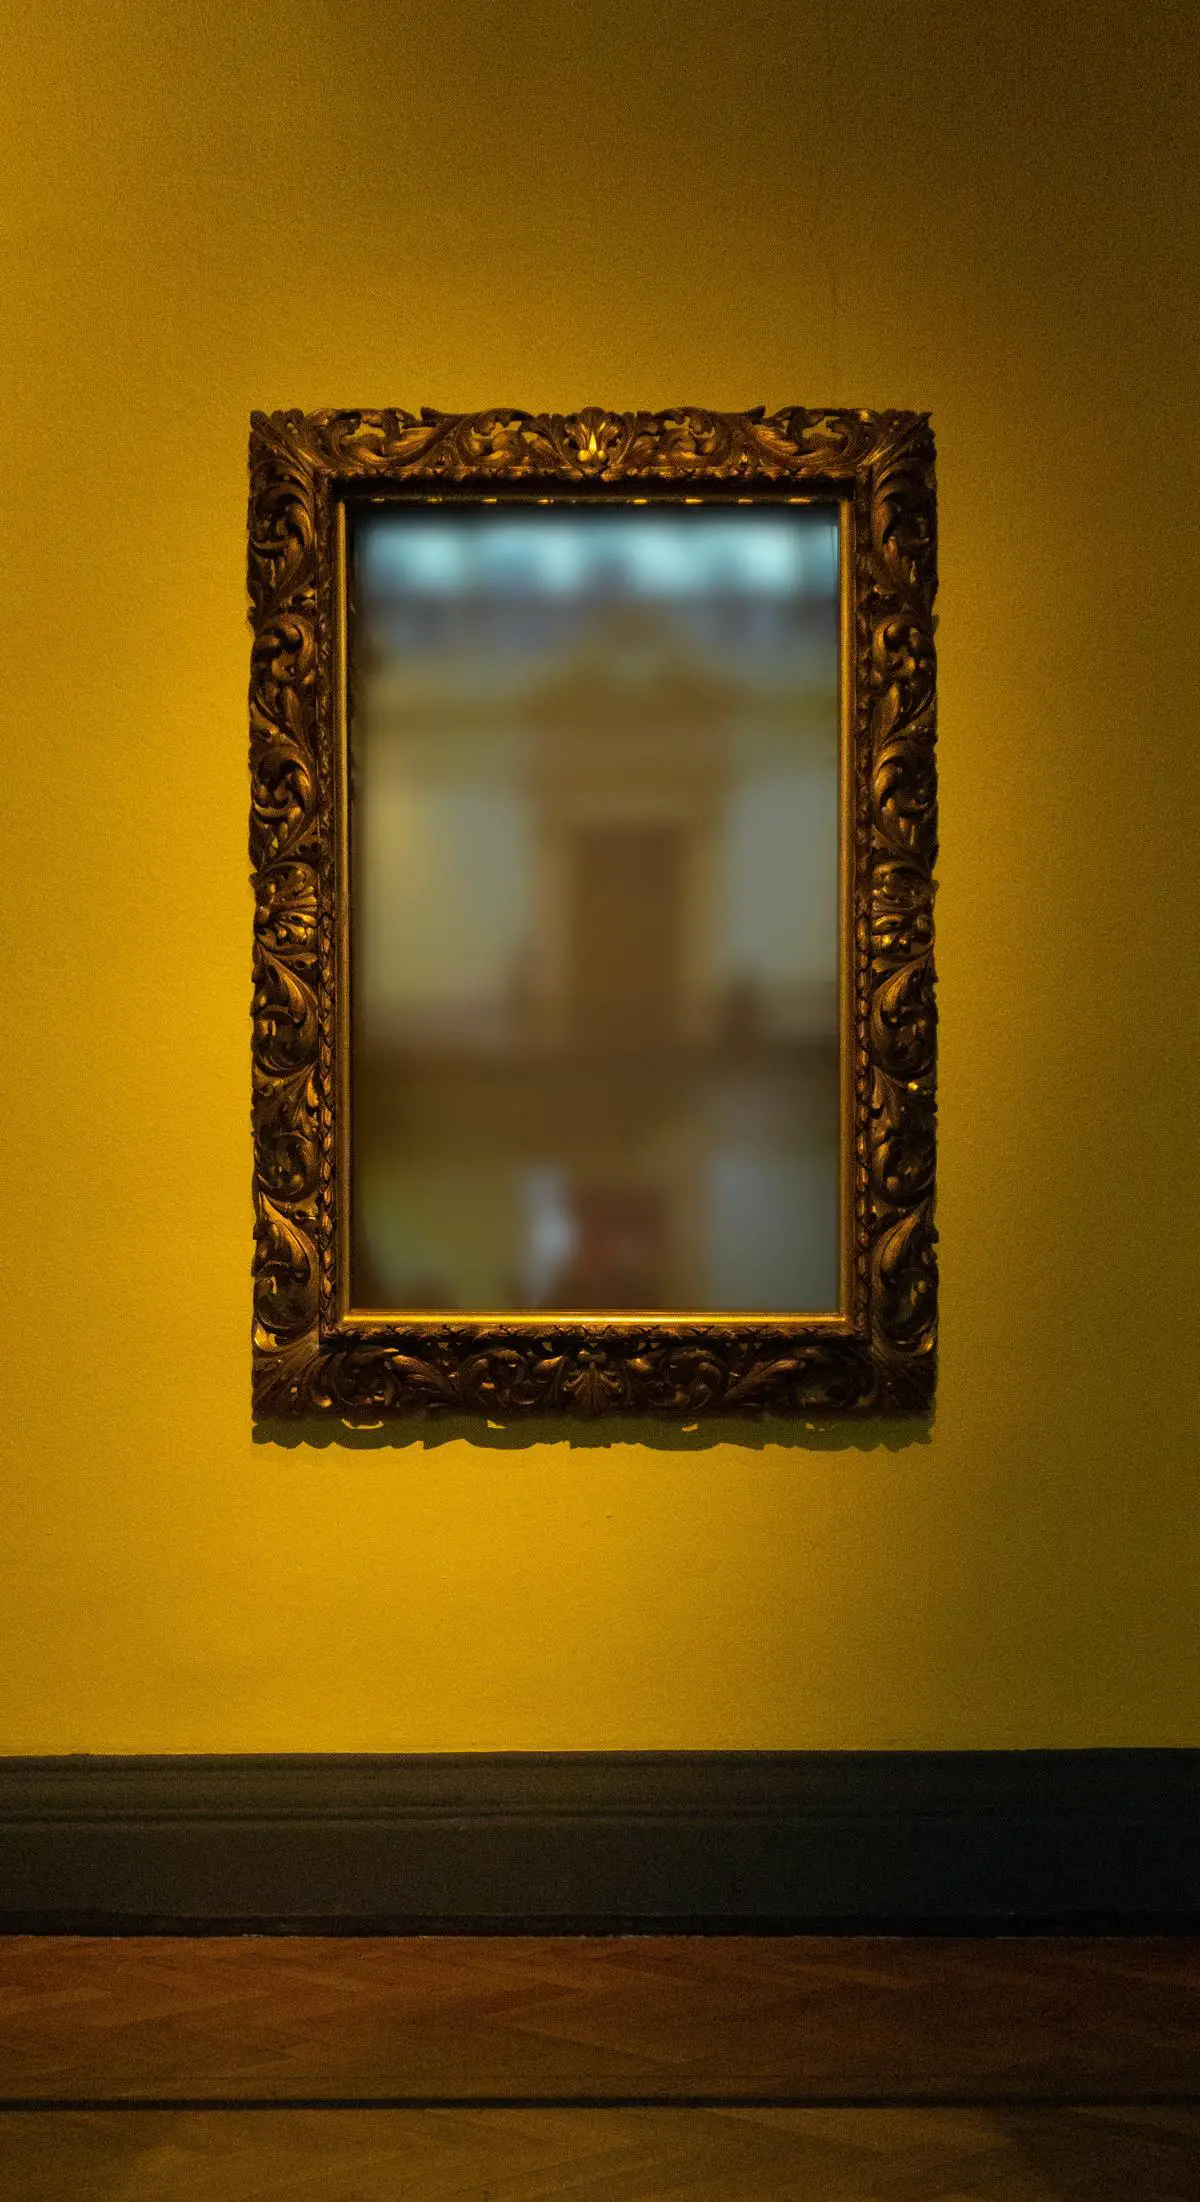 An image of a DIY IKEA Hovet Mirror Frame, with a wooden frame attached to the mirrored surface